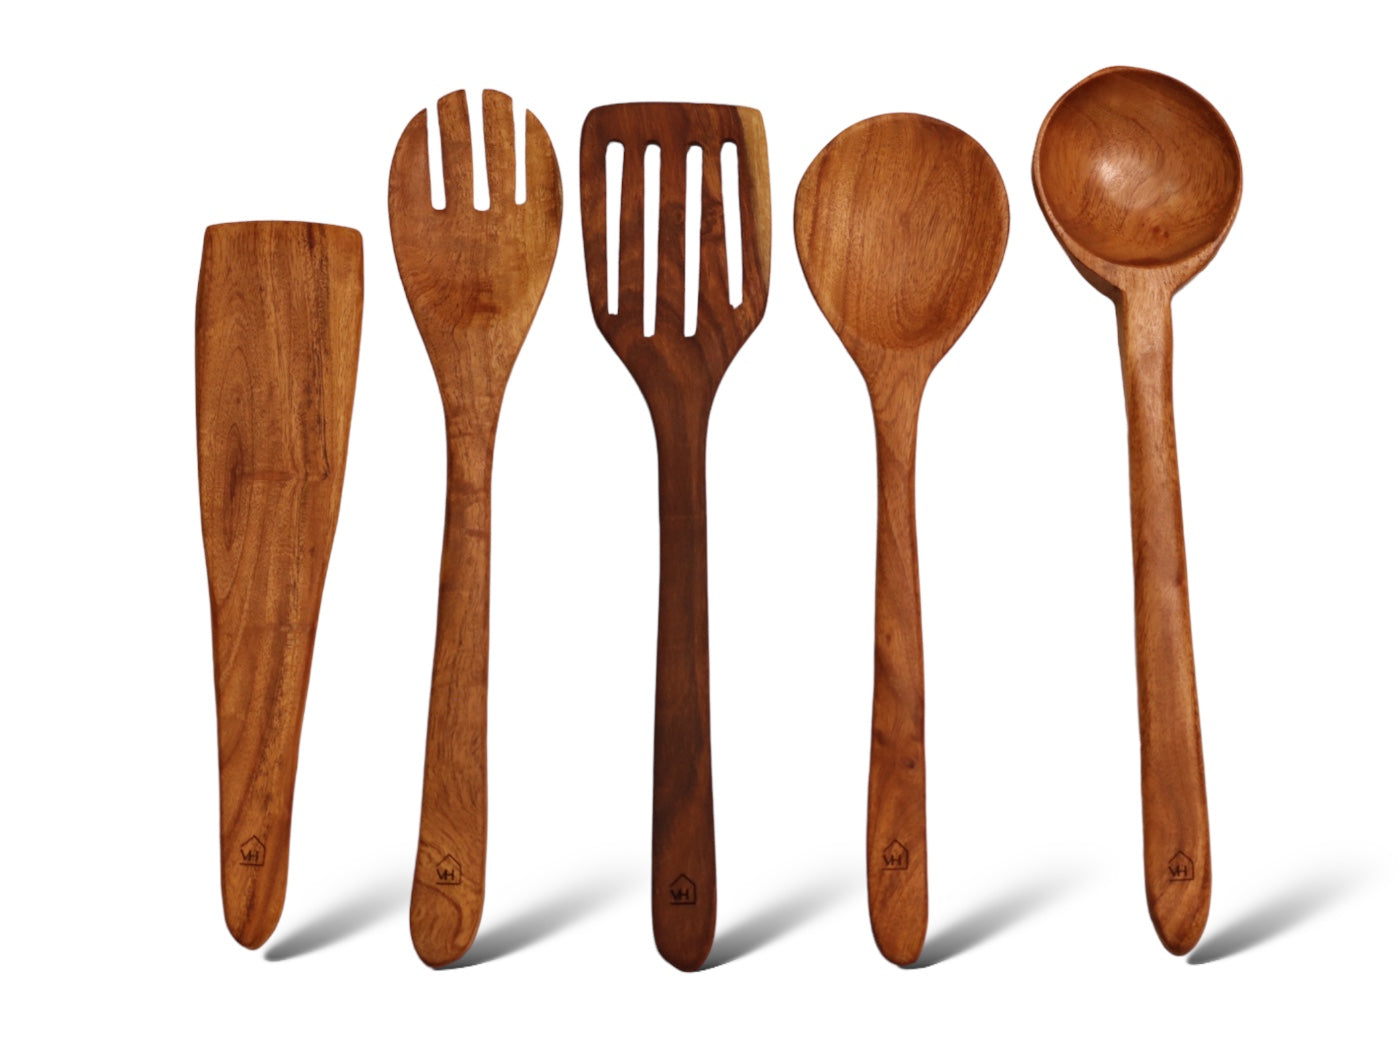 Neem Wood Kitchen Cooking Spoons Set of 5